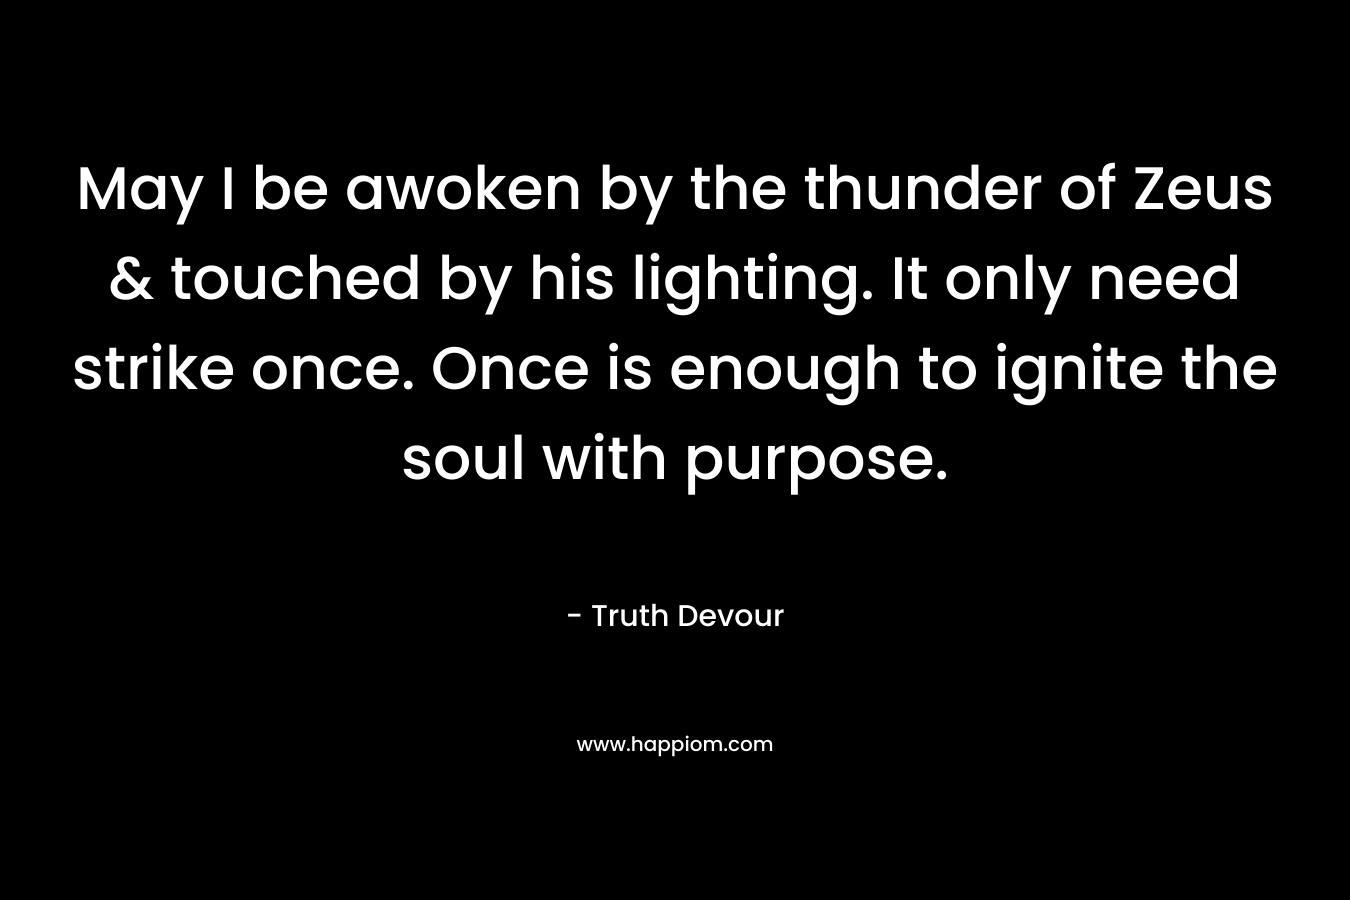 May I be awoken by the thunder of Zeus & touched by his lighting. It only need strike once. Once is enough to ignite the soul with purpose. – Truth Devour